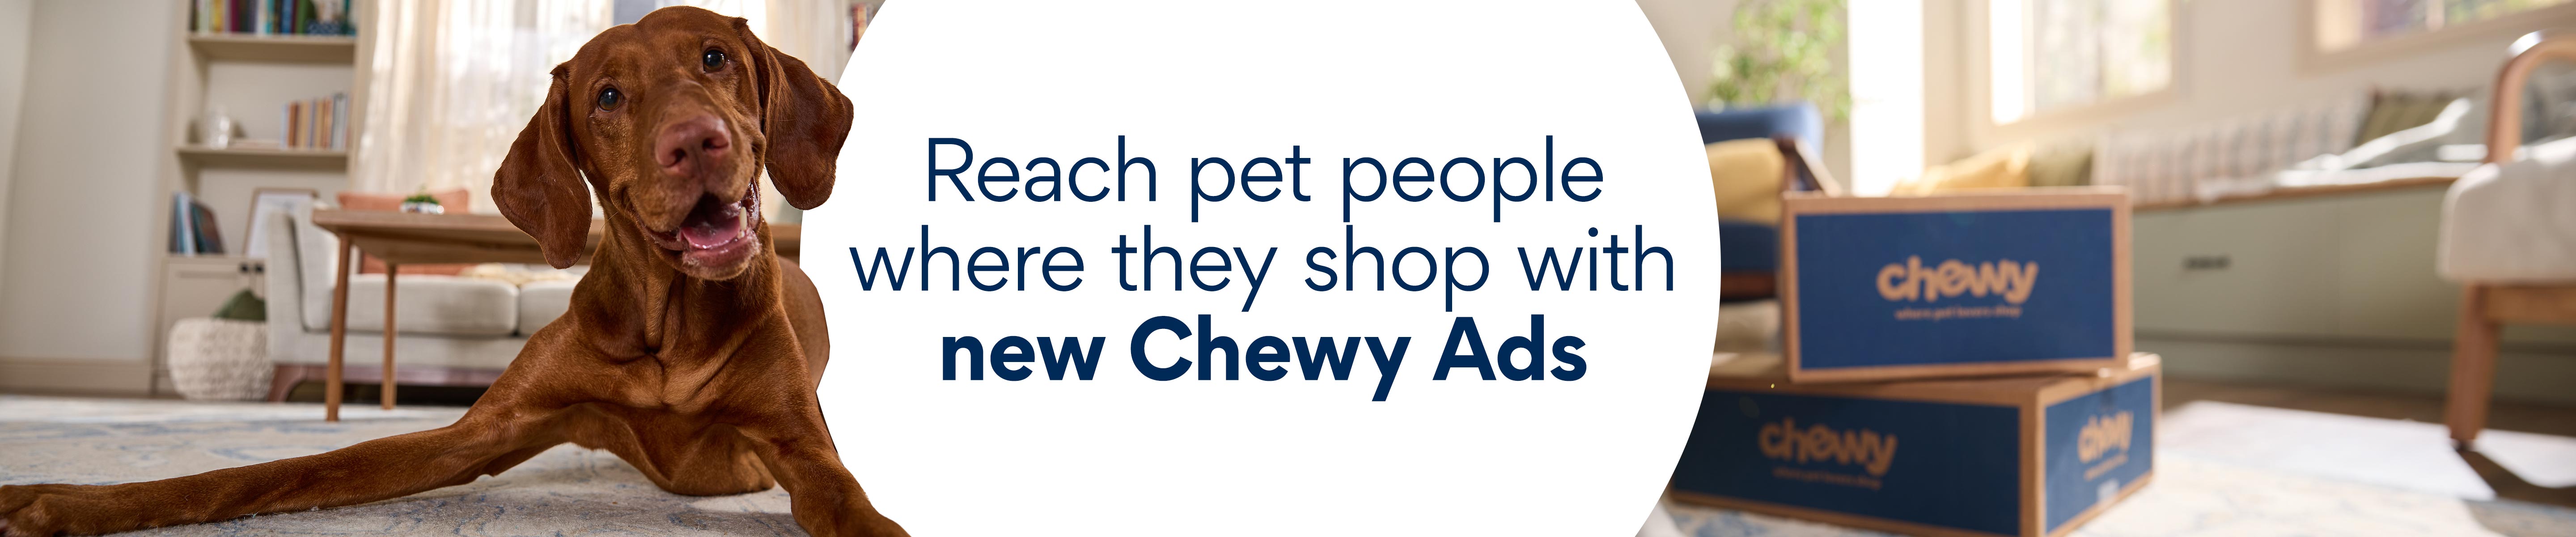 Reach pet people where they shop with new Chewy Ads